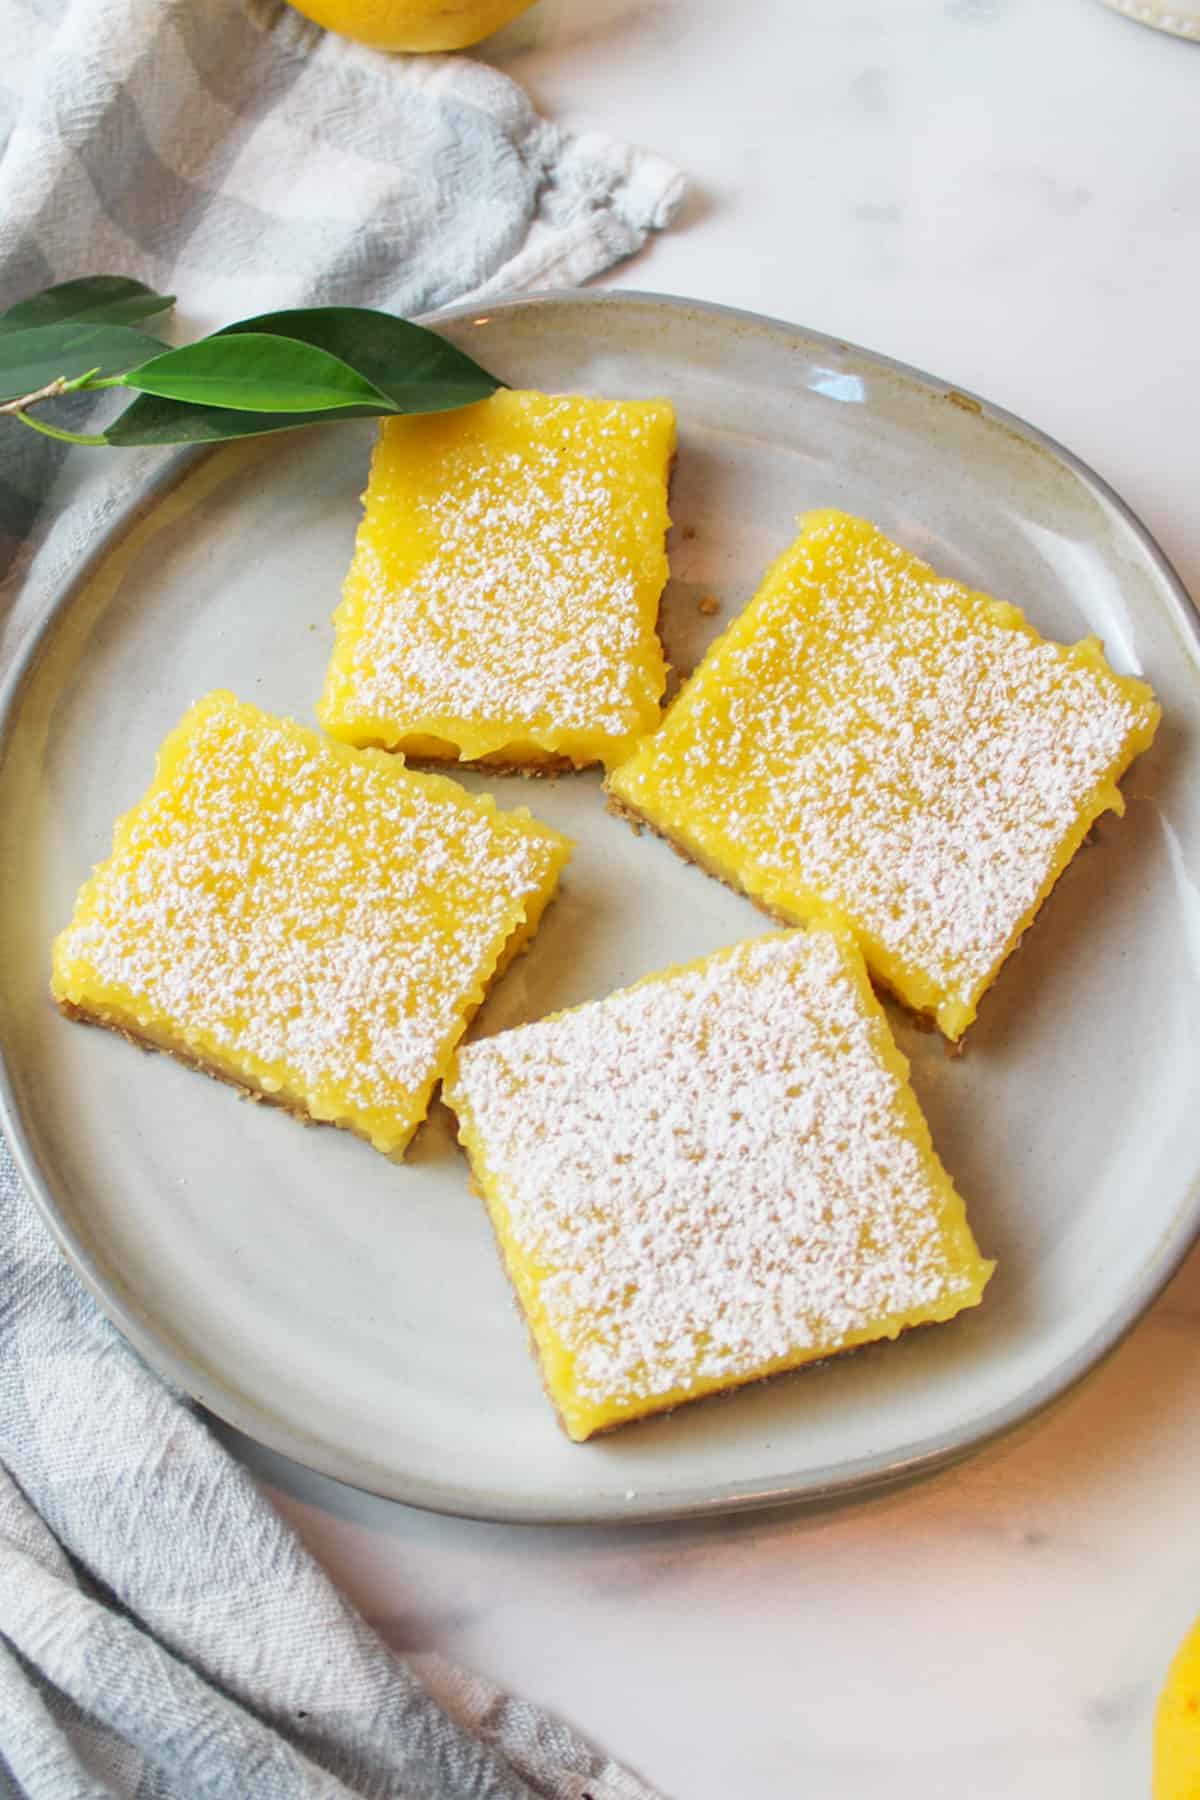 4 powdered sugar dusted squares of lemon bars on a plate